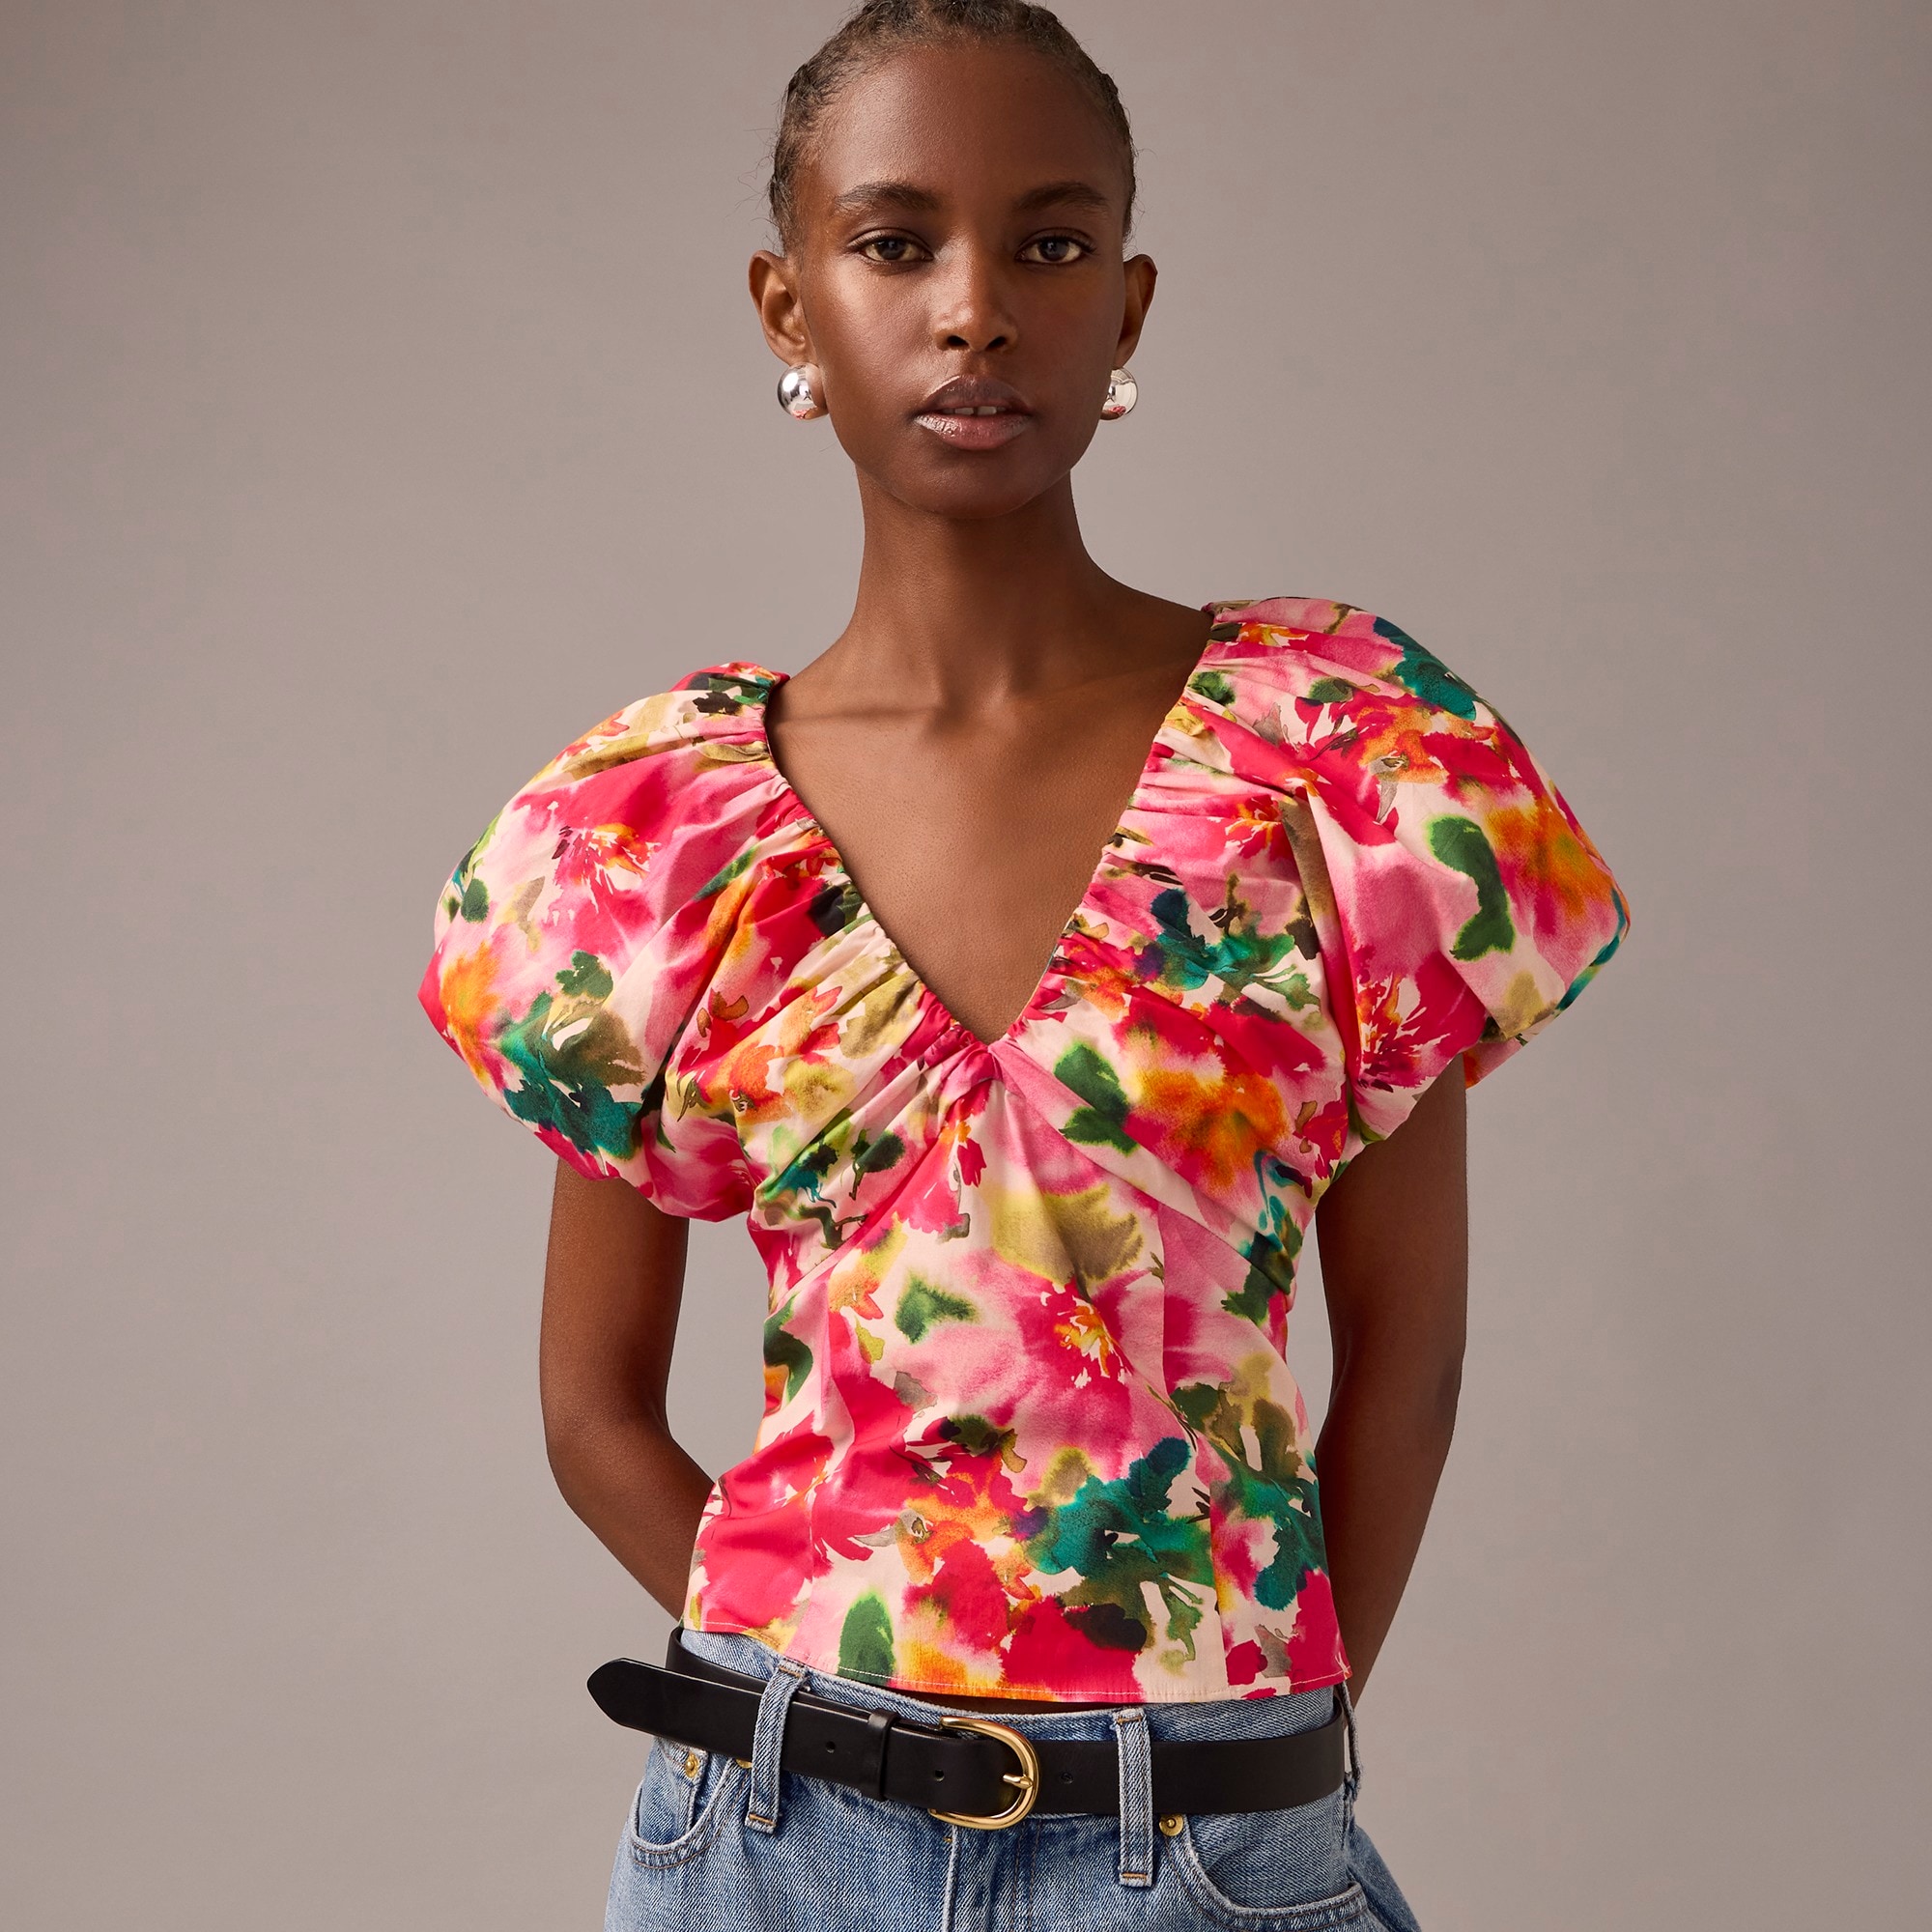 womens Cecily top in floral stretch cotton poplin blend